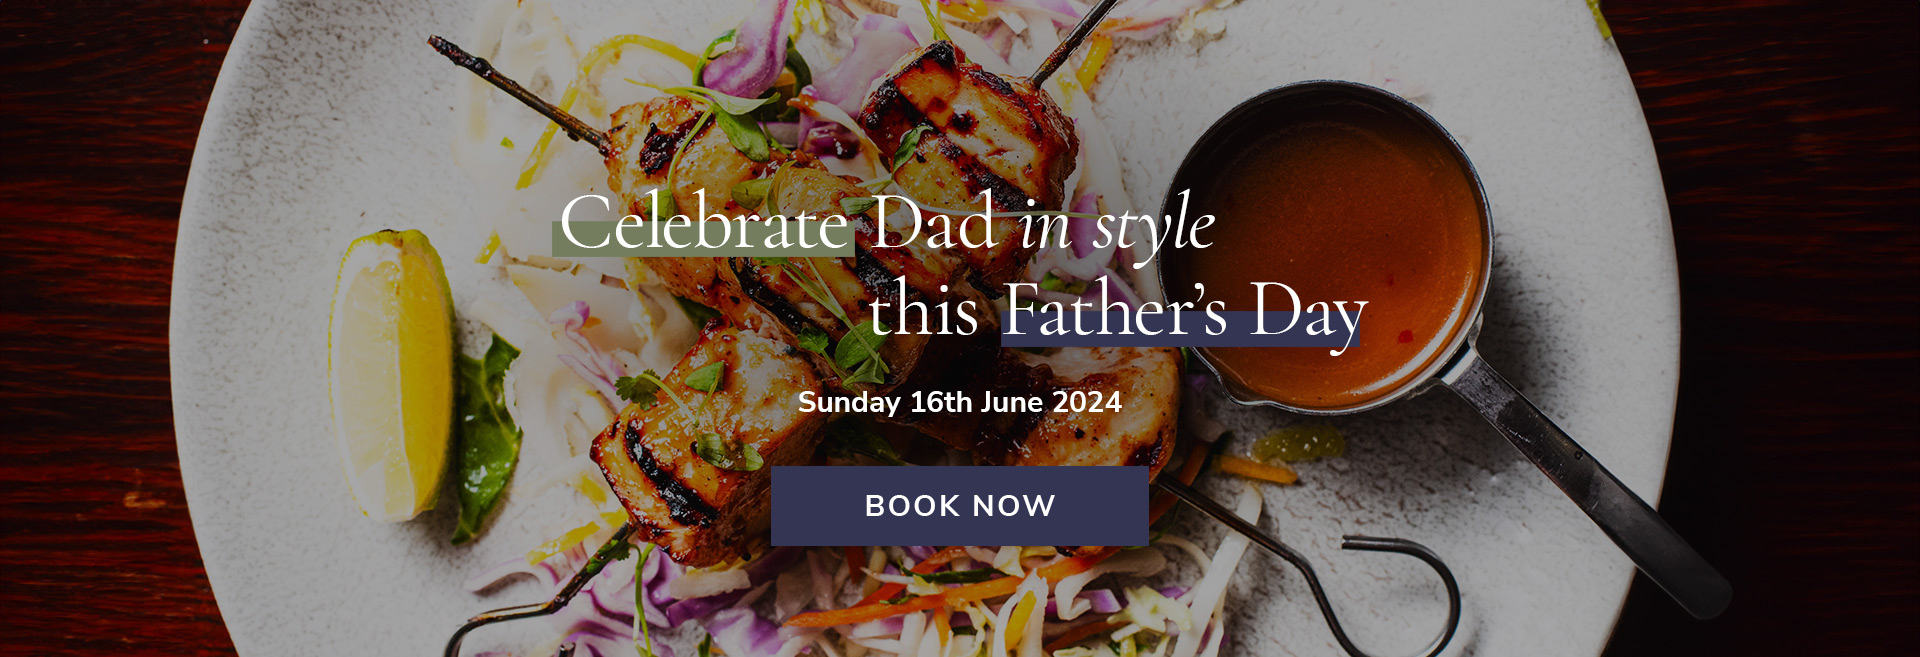 Father's Day at The Washington